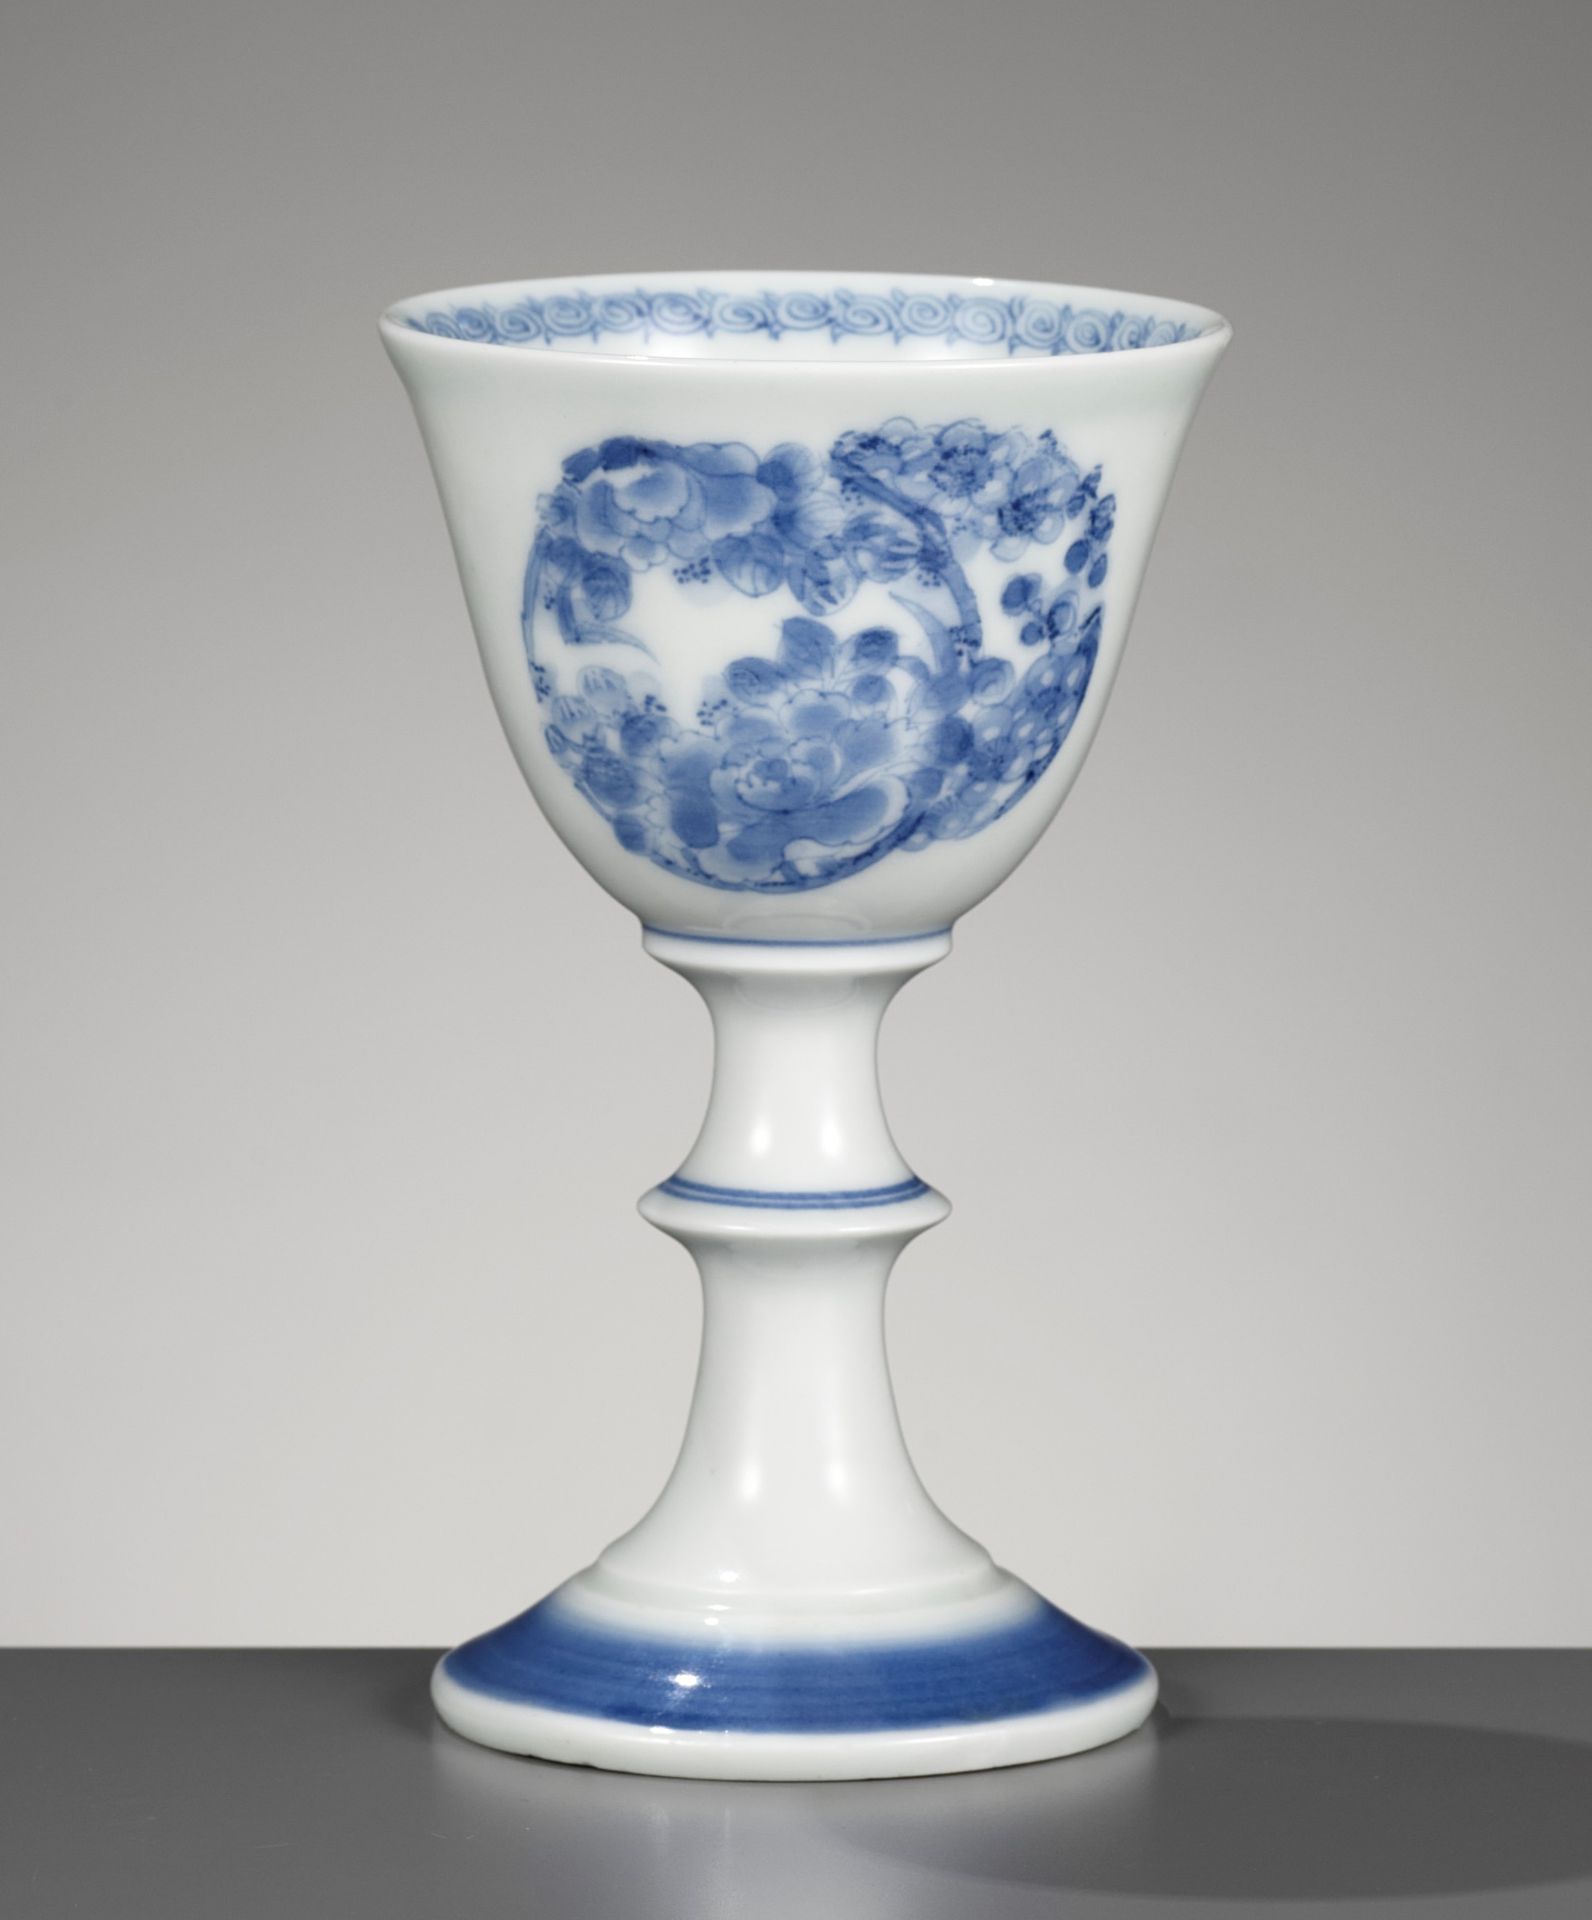 A HIRADO BLUE AND WHITE STEM CUP WITH FLORAL ROUNDELS